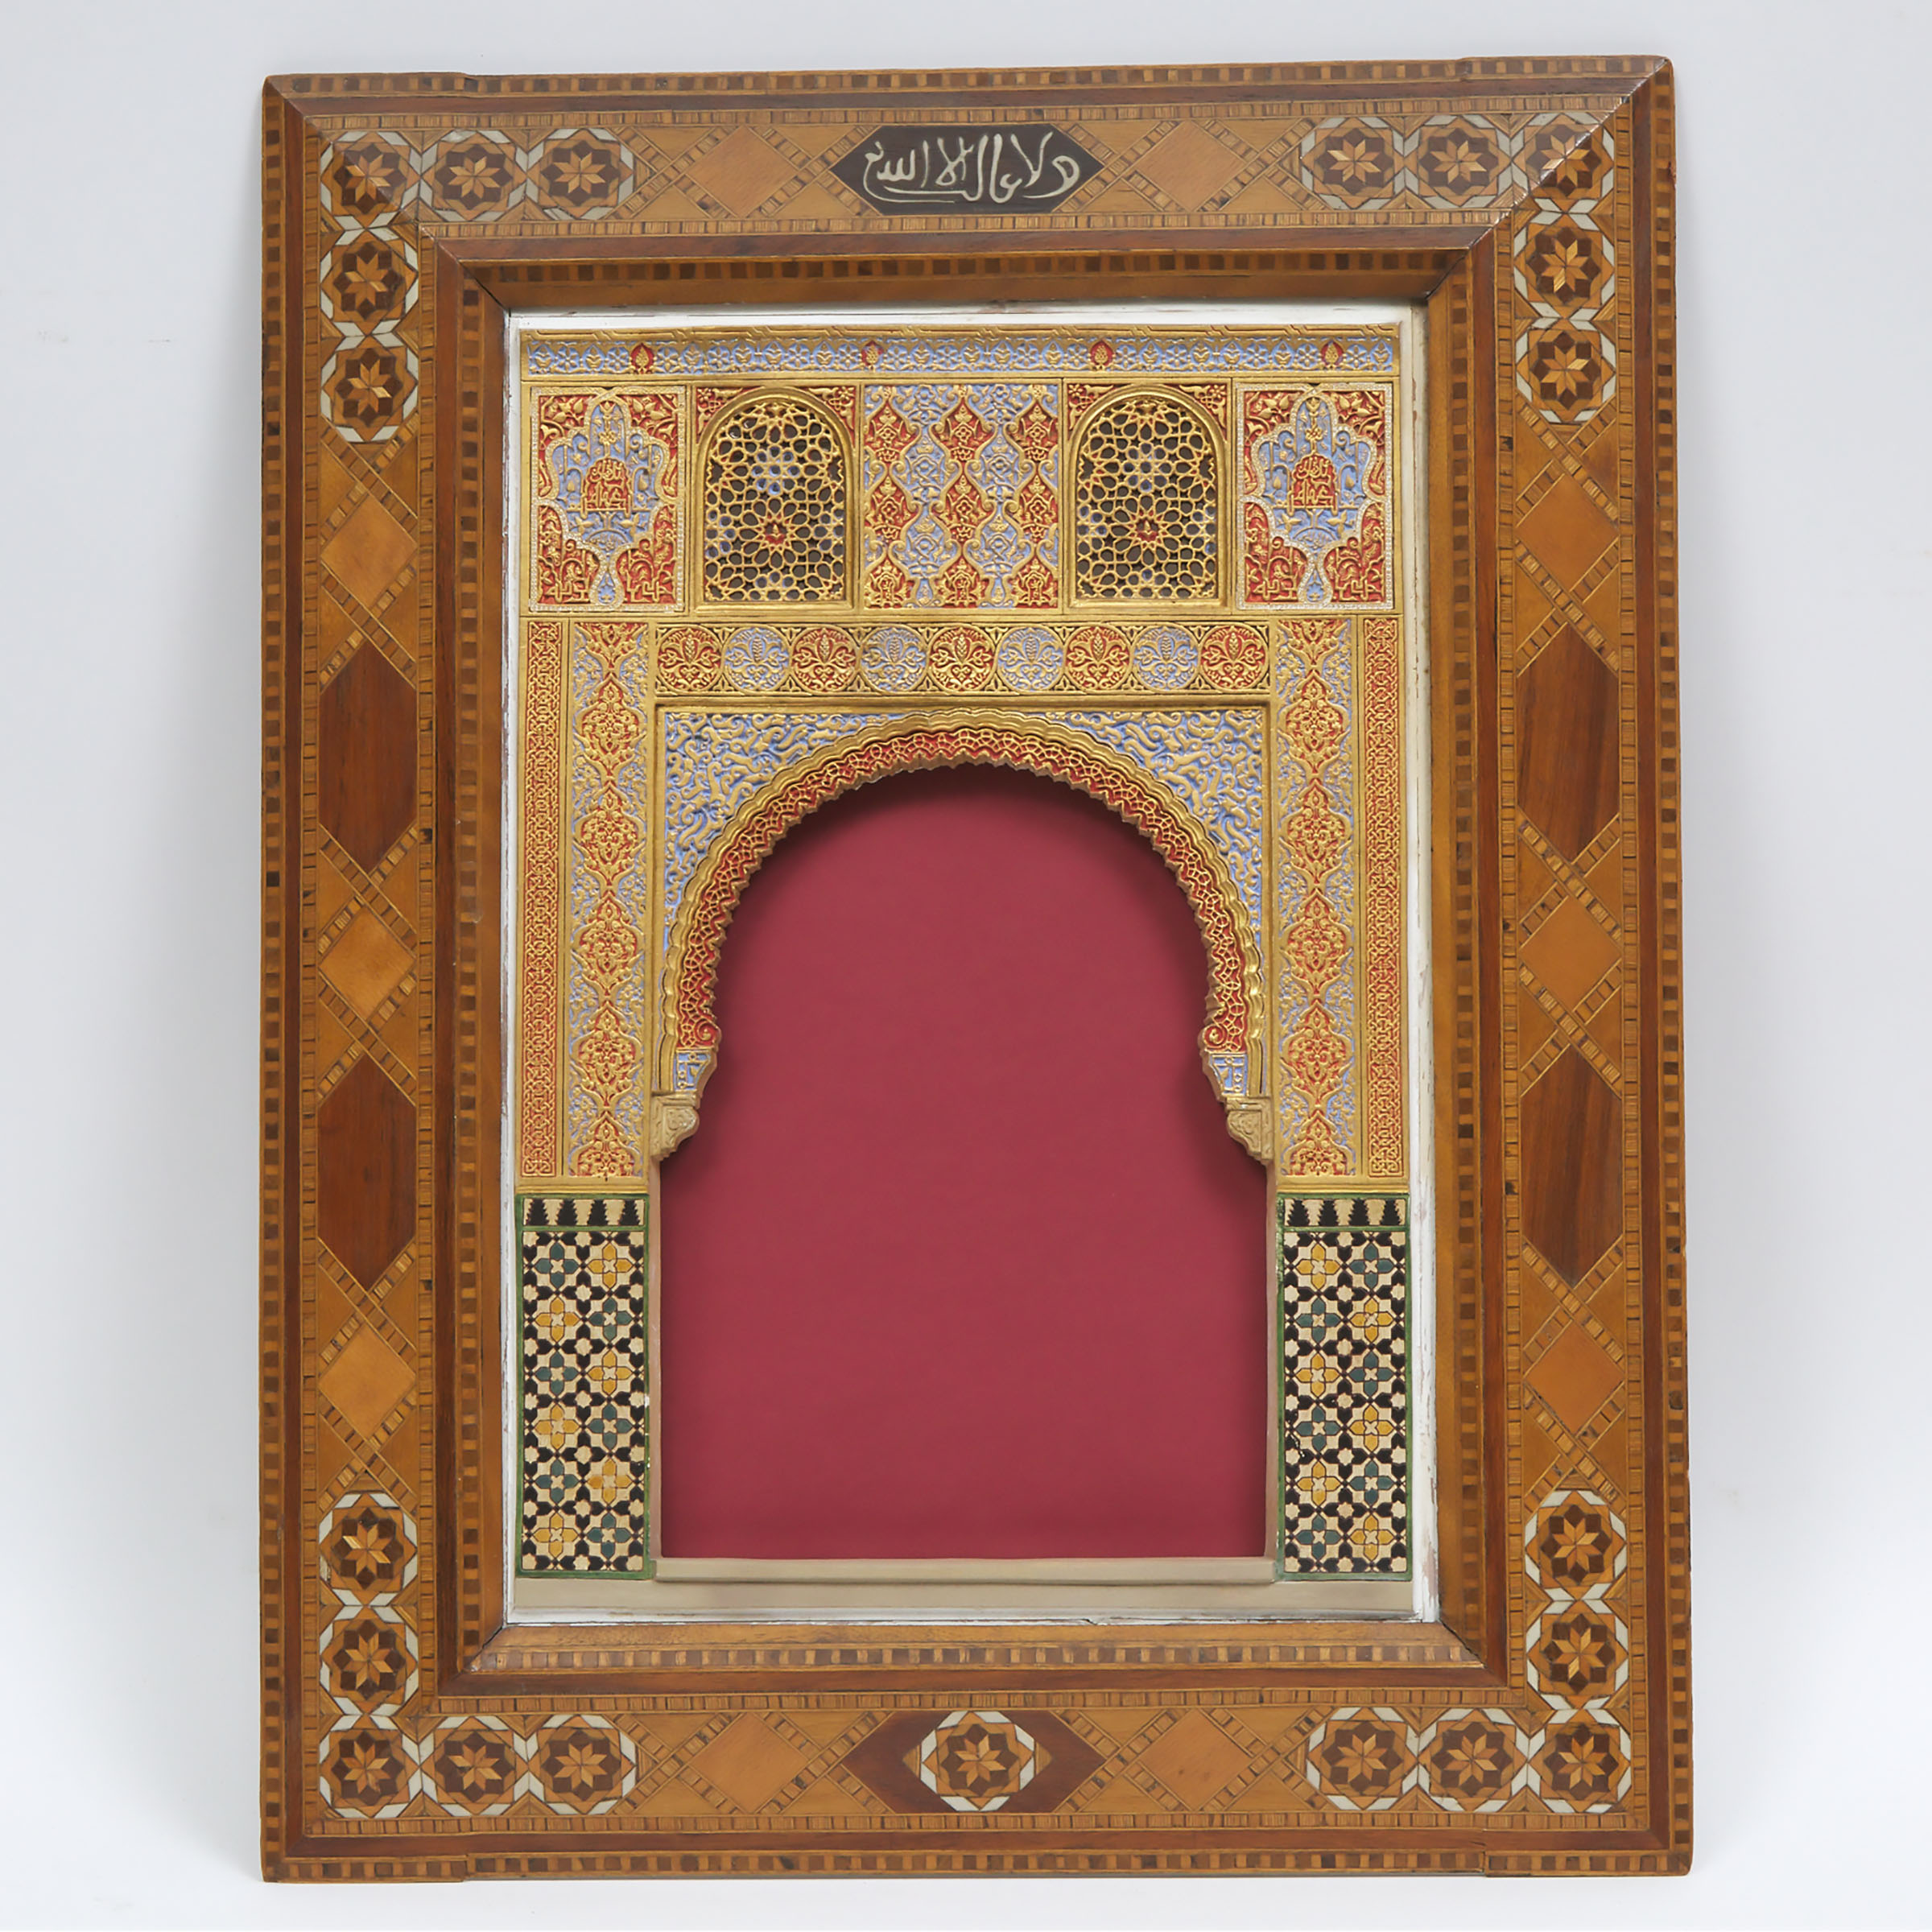 Painted Gesso Alhambra Palace Mihrab Plaque Granada, Spain, early-mid 20th century